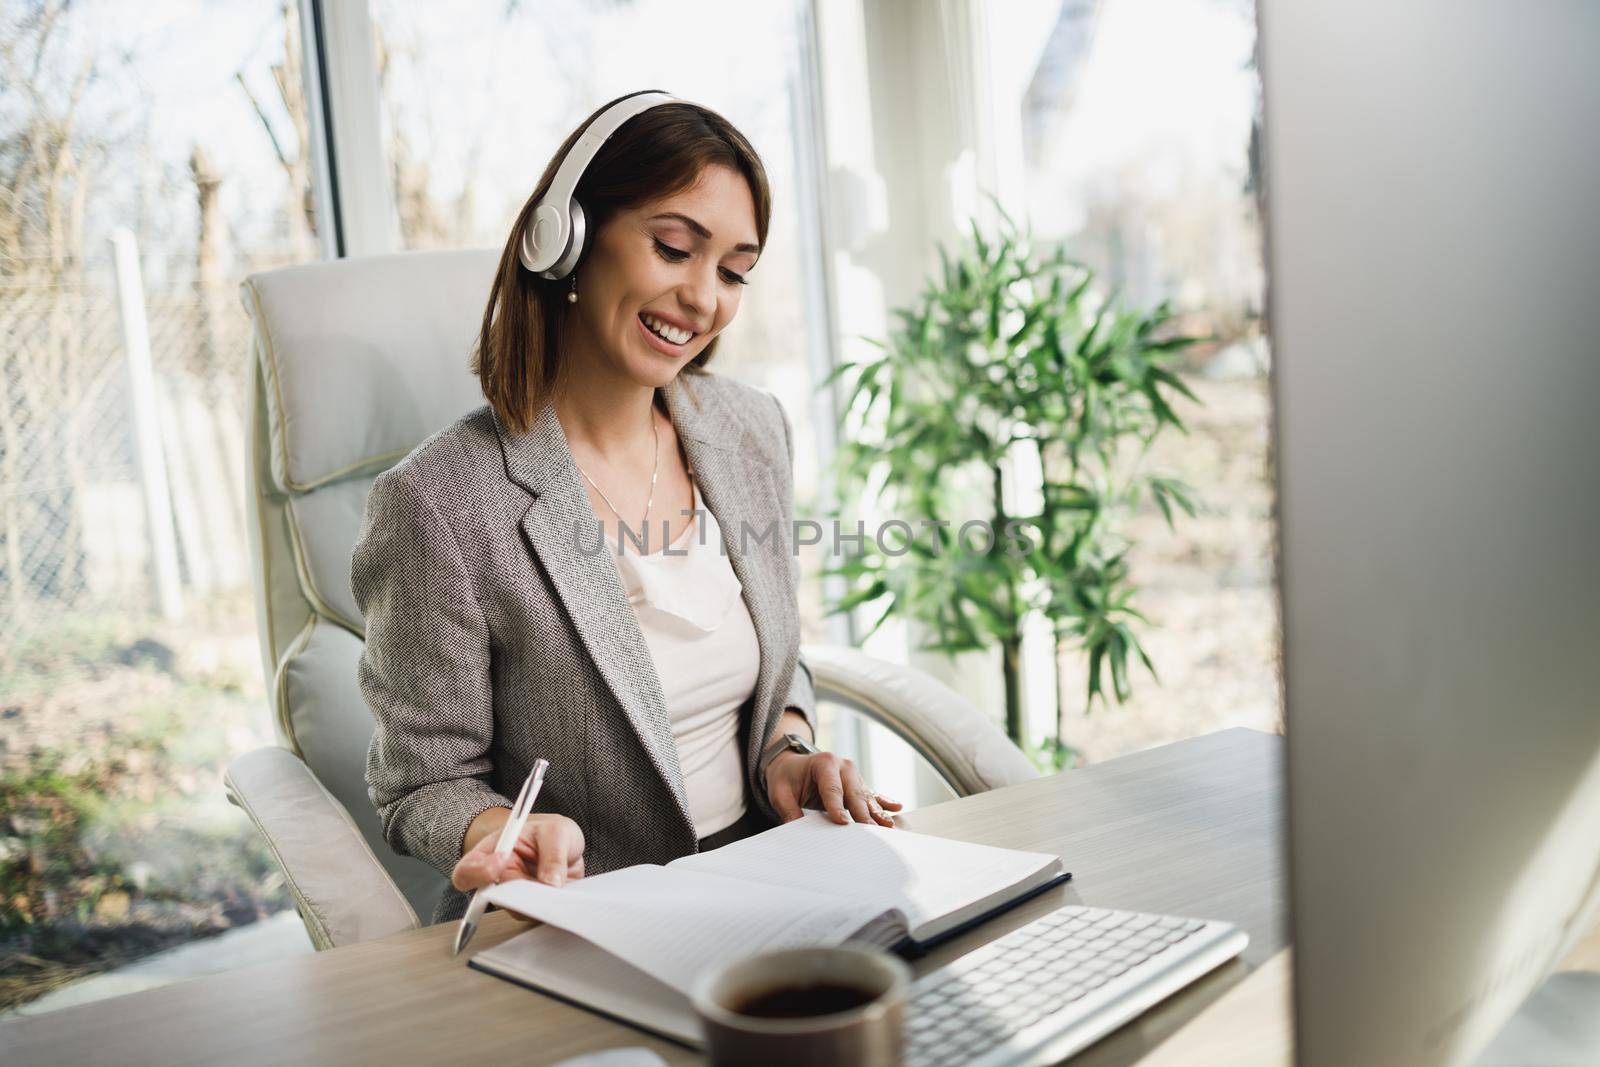 An attractive young woman with headphones working on computer at home office.